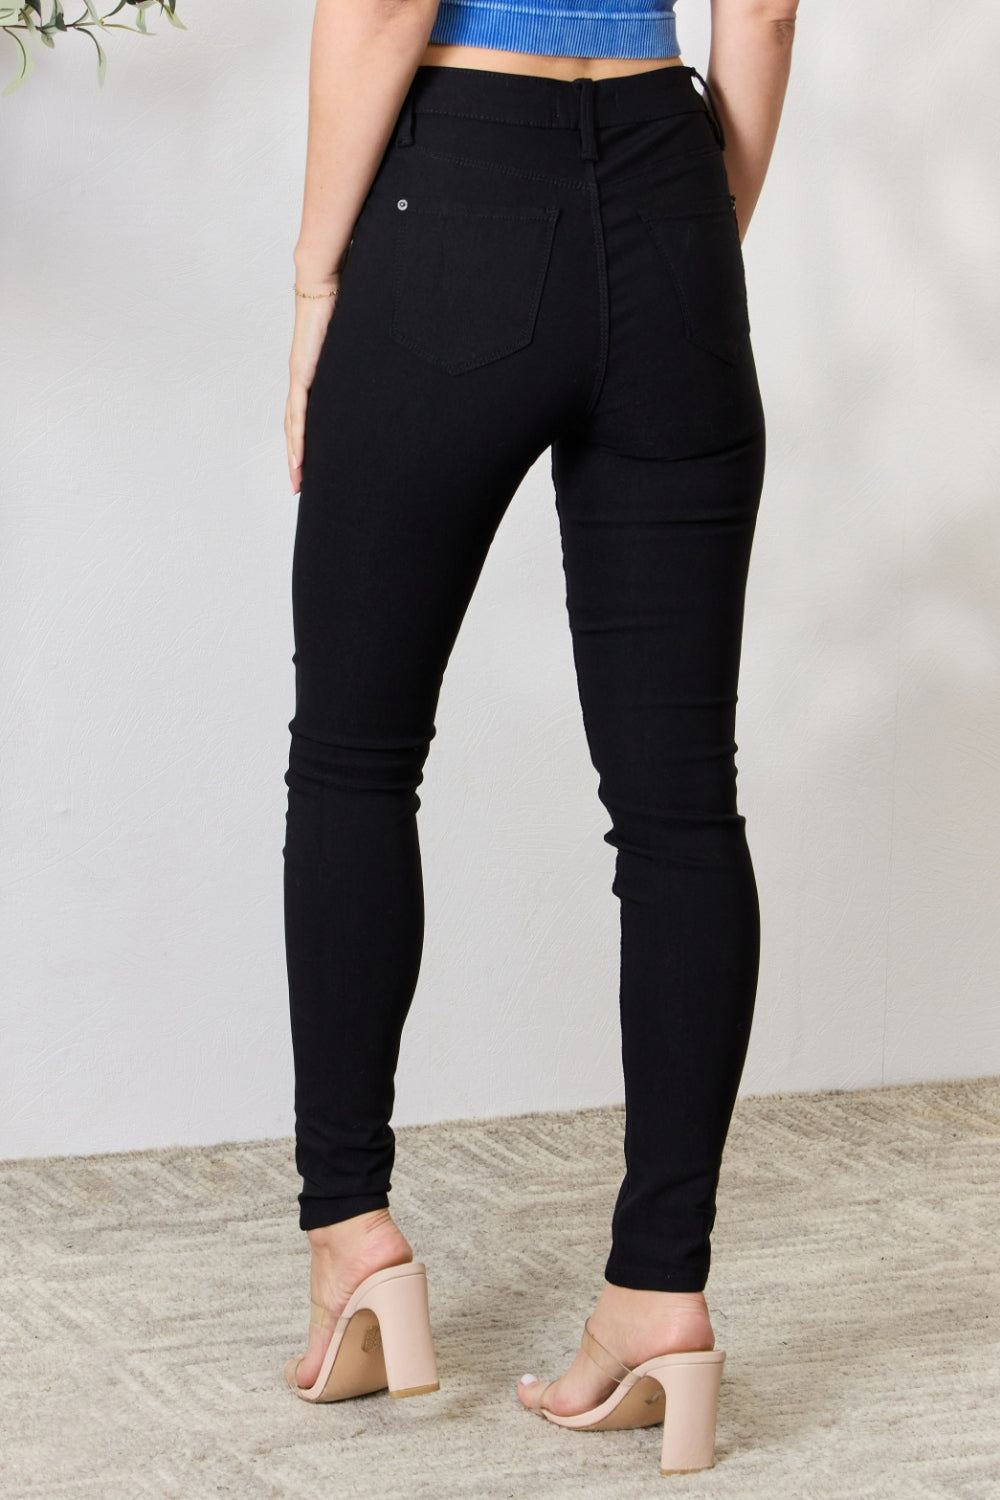 YMI Jeans Hyperstretch Skinny Jeans - Black - Inspired Eye Boutique